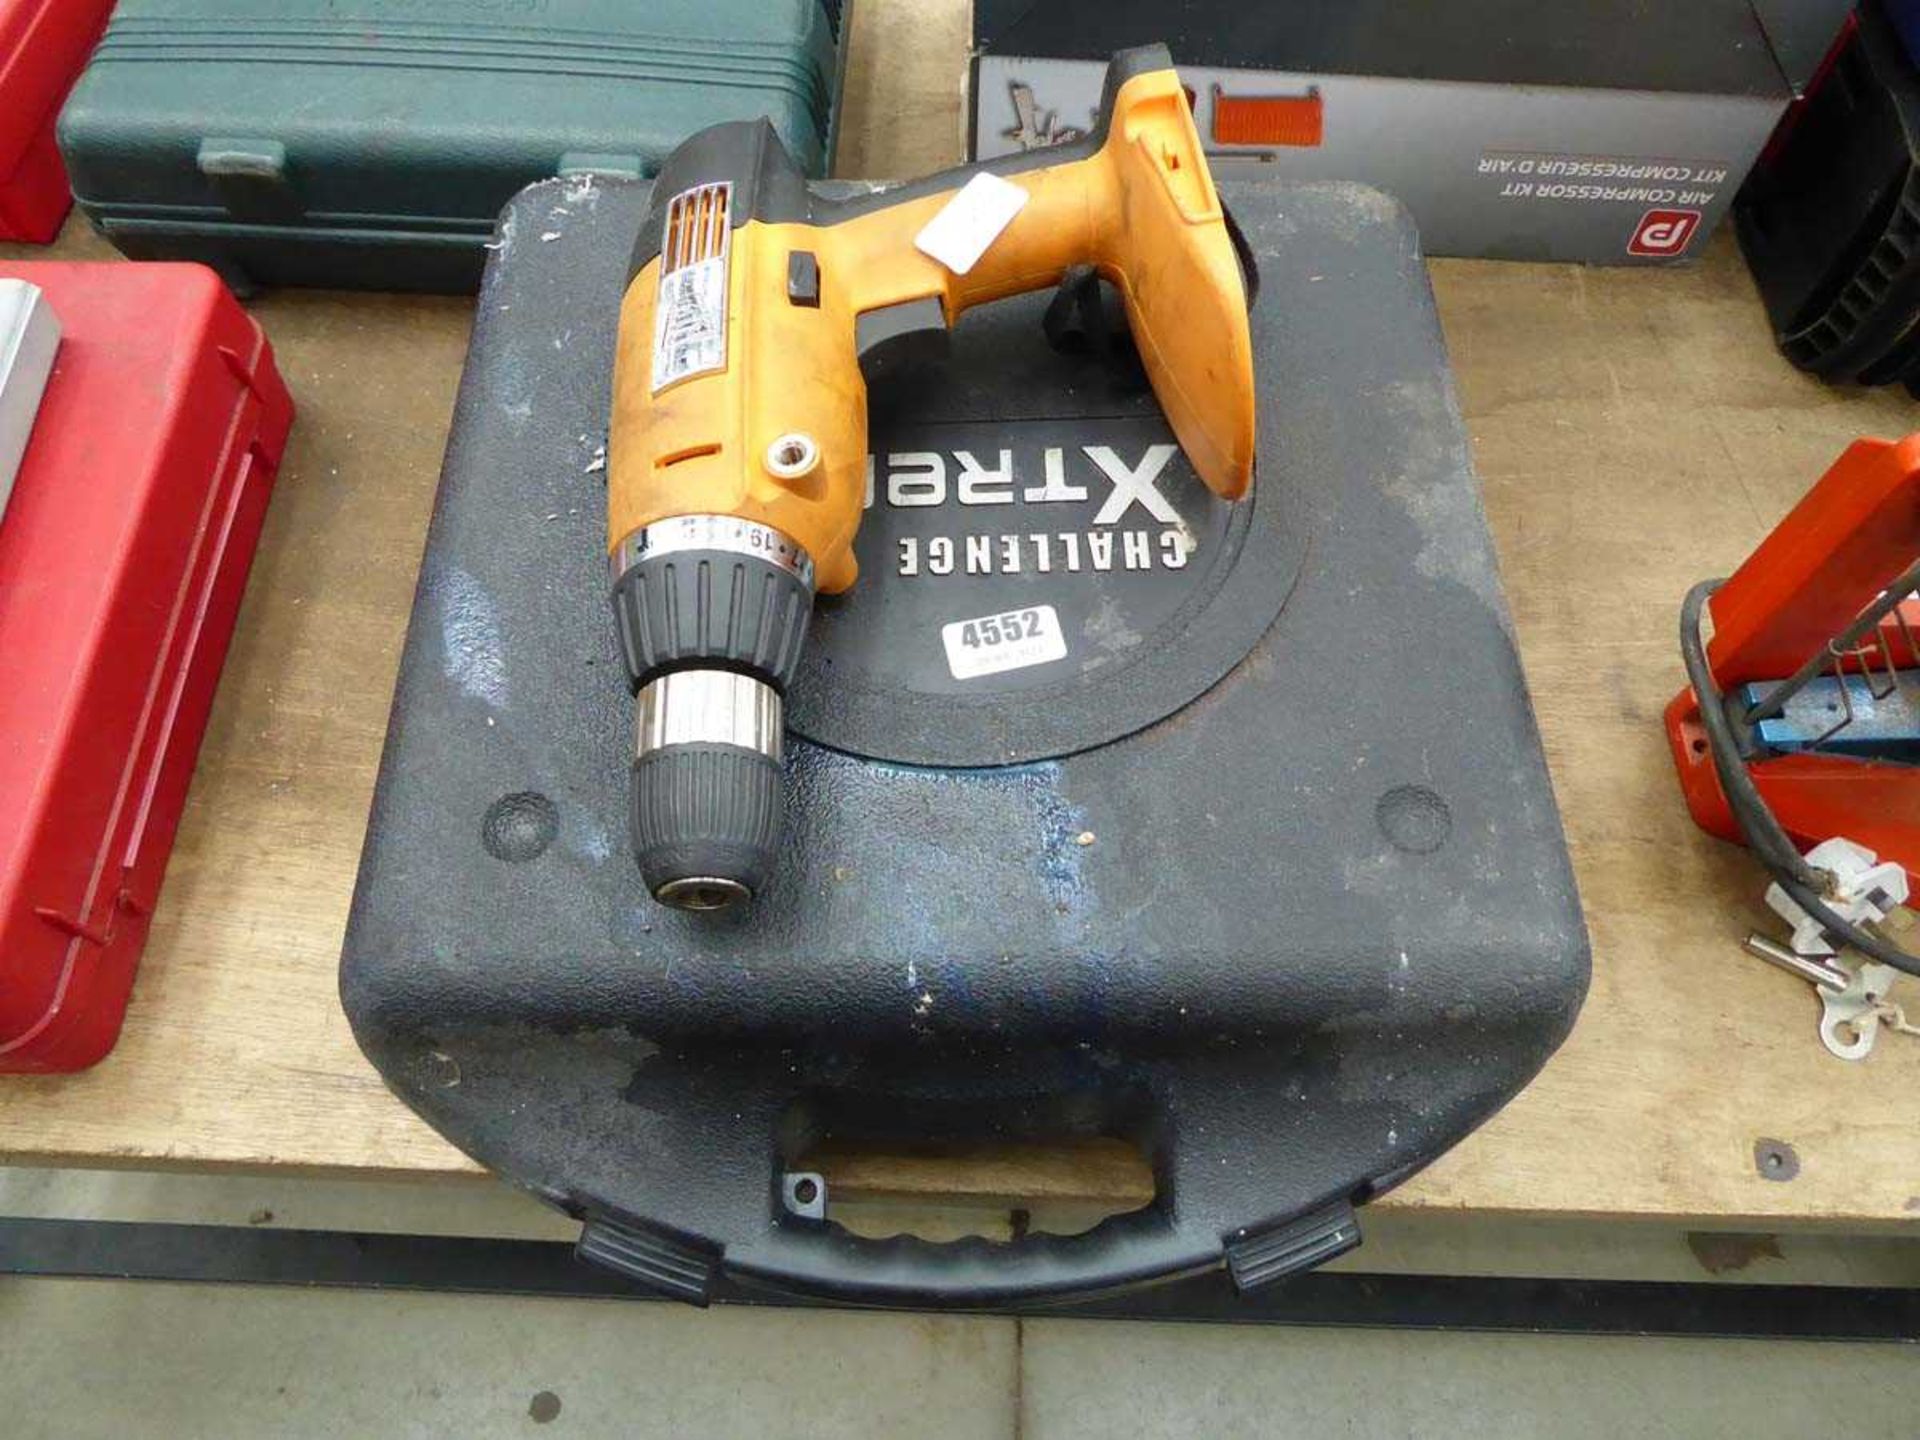 JCB battery drill, no battery or charger; and Challenge Extreme drill and vacuum kit, with 2 - Bild 2 aus 2